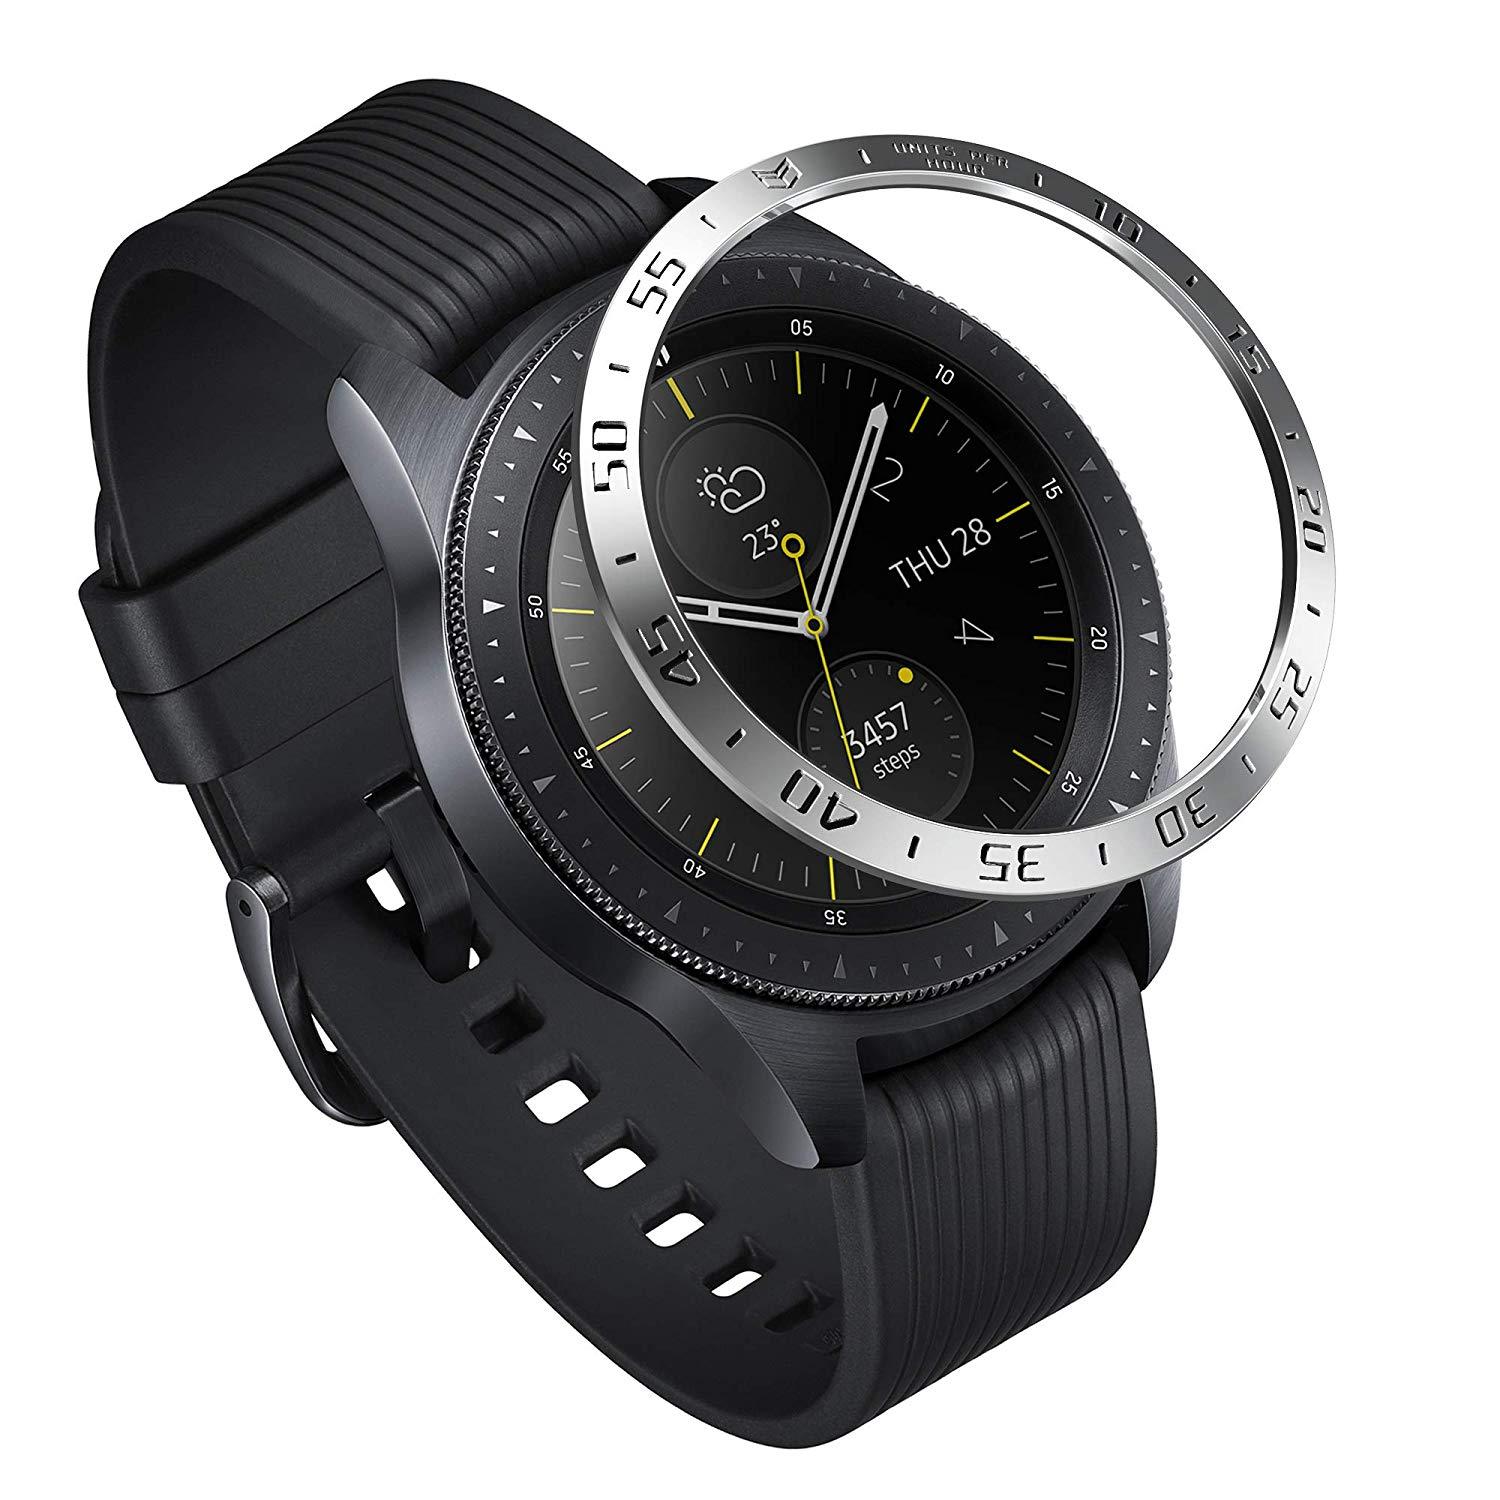 Ringke Bezel Styling stainless steel for samsung galaxy watch 42mm